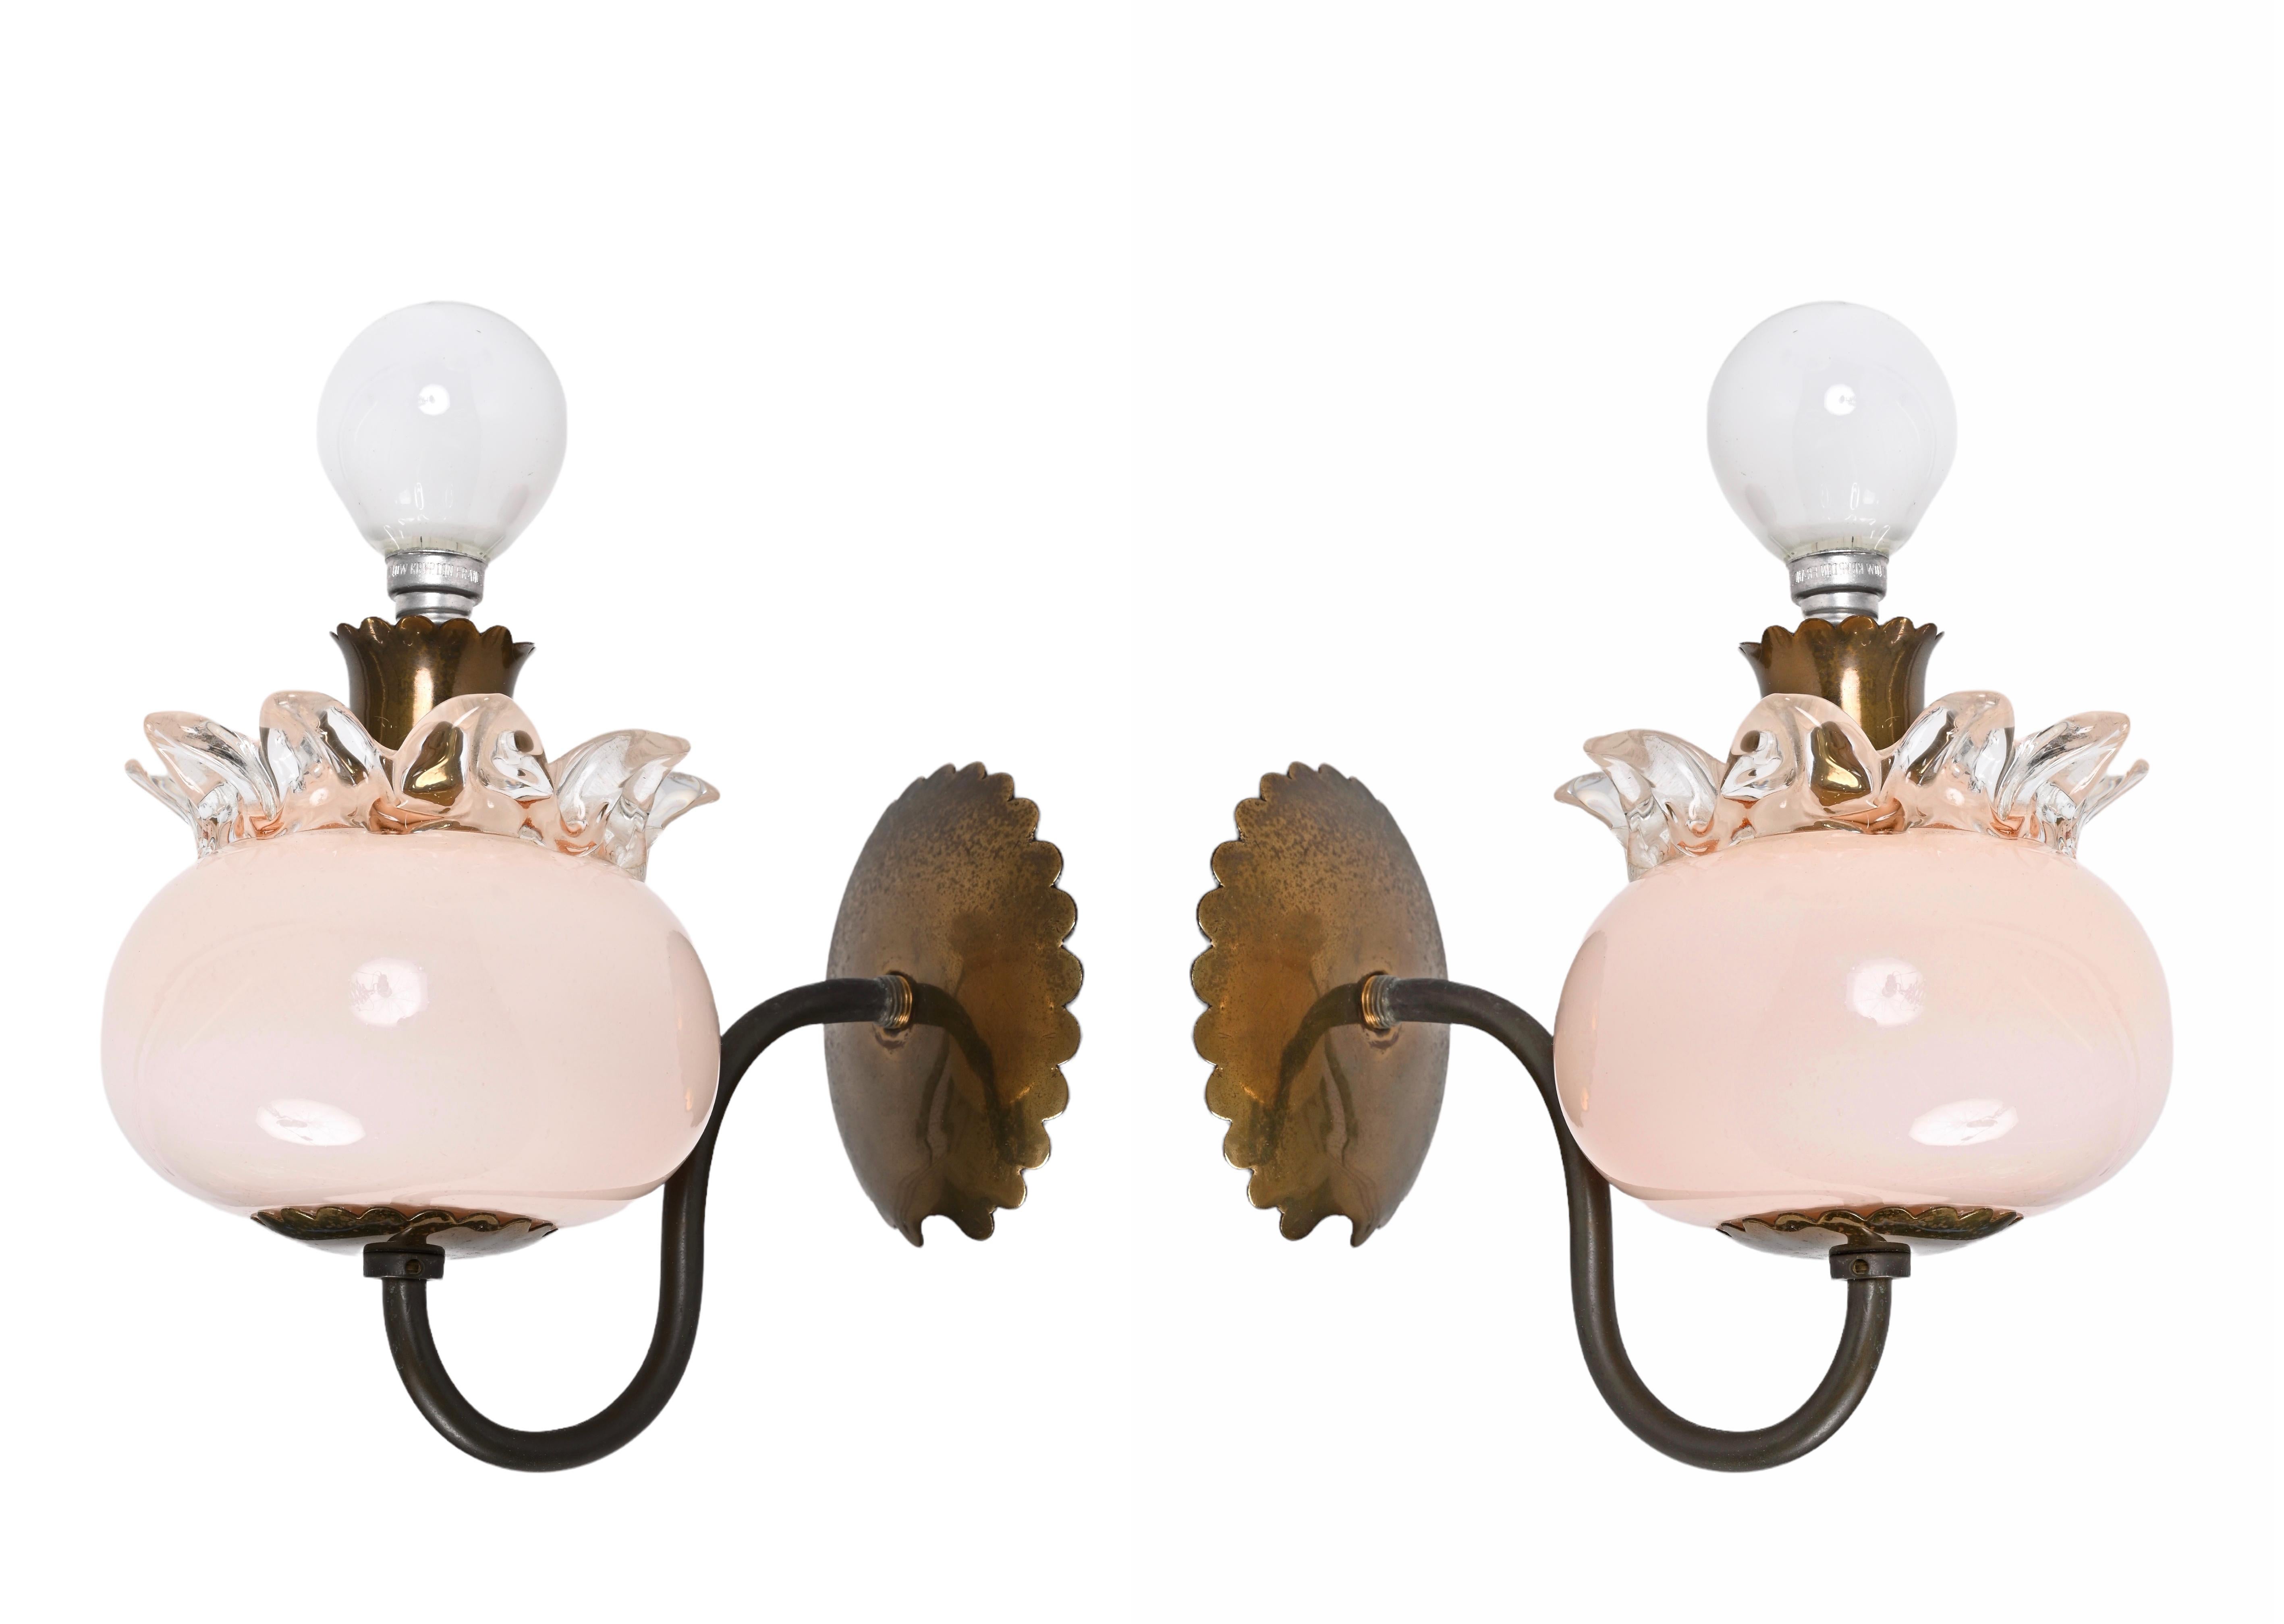 Pair of Murano Pink Glass and Brass Sconces Attributed to Archimede Seguso 1940s For Sale 1